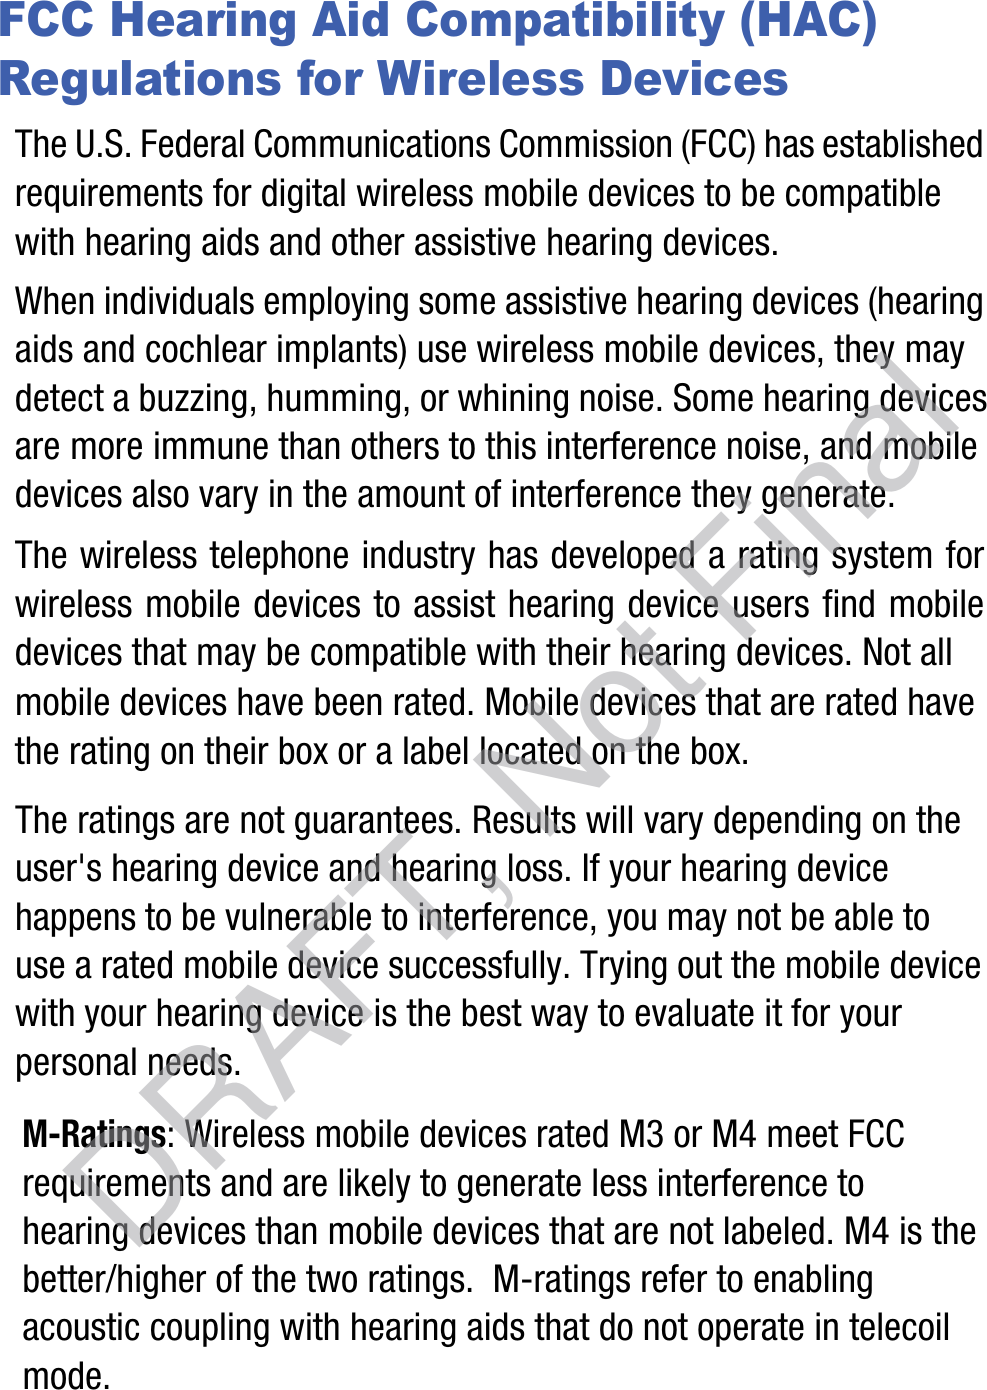 FCC Hearing Aid Compatibility (HAC) Regulations for Wireless DevicesThe U.S. Federal Communications Commission (FCC) has established requirements for digital wireless mobile devices to be compatible with hearing aids and other assistive hearing devices.When individuals employing some assistive hearing devices (hearing aids and cochlear implants) use wireless mobile devices, they may detect a buzzing, humming, or whining noise. Some hearing devices are more immune than others to this interference noise, and mobile devices also vary in the amount of interference they generate.The wireless telephone industry has developed a rating system for wireless mobile devices to assist hearing device users find mobile devices that may be compatible with their hearing devices. Not all mobile devices have been rated. Mobile devices that are rated have the rating on their box or a label located on the box.The ratings are not guarantees. Results will vary depending on the user&apos;s hearing device and hearing loss. If your hearing device happens to be vulnerable to interference, you may not be able to use a rated mobile device successfully. Trying out the mobile device with your hearing device is the best way to evaluate it for your personal needs.M-Ratings: Wireless mobile devices rated M3 or M4 meet FCC requirements and are likely to generate less interference to hearing devices than mobile devices that are not labeled. M4 is the better/higher of the two ratings.  M-ratings refer to enabling acoustic coupling with hearing aids that do not operate in telecoil mode.DRAFT, Not Final